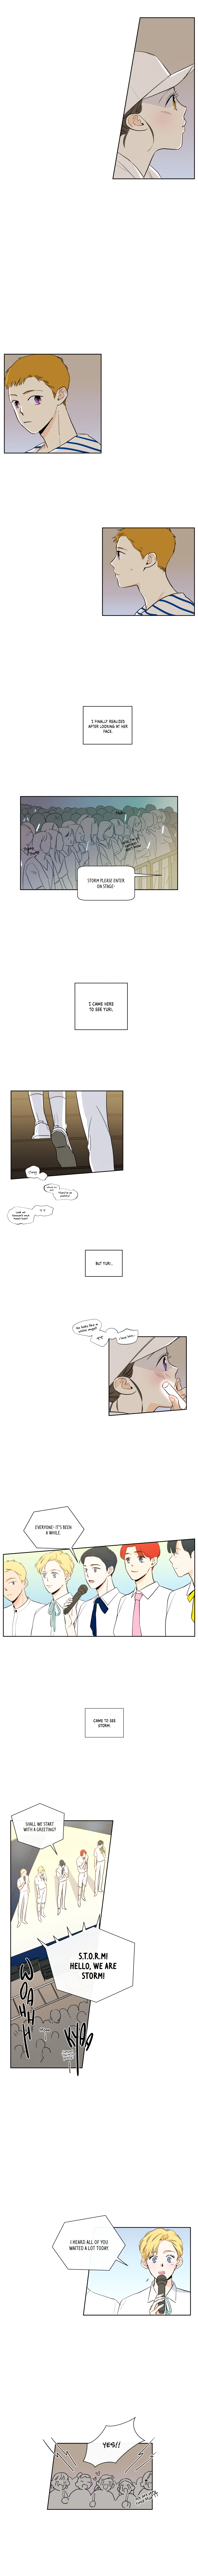 How We Love - Page 2